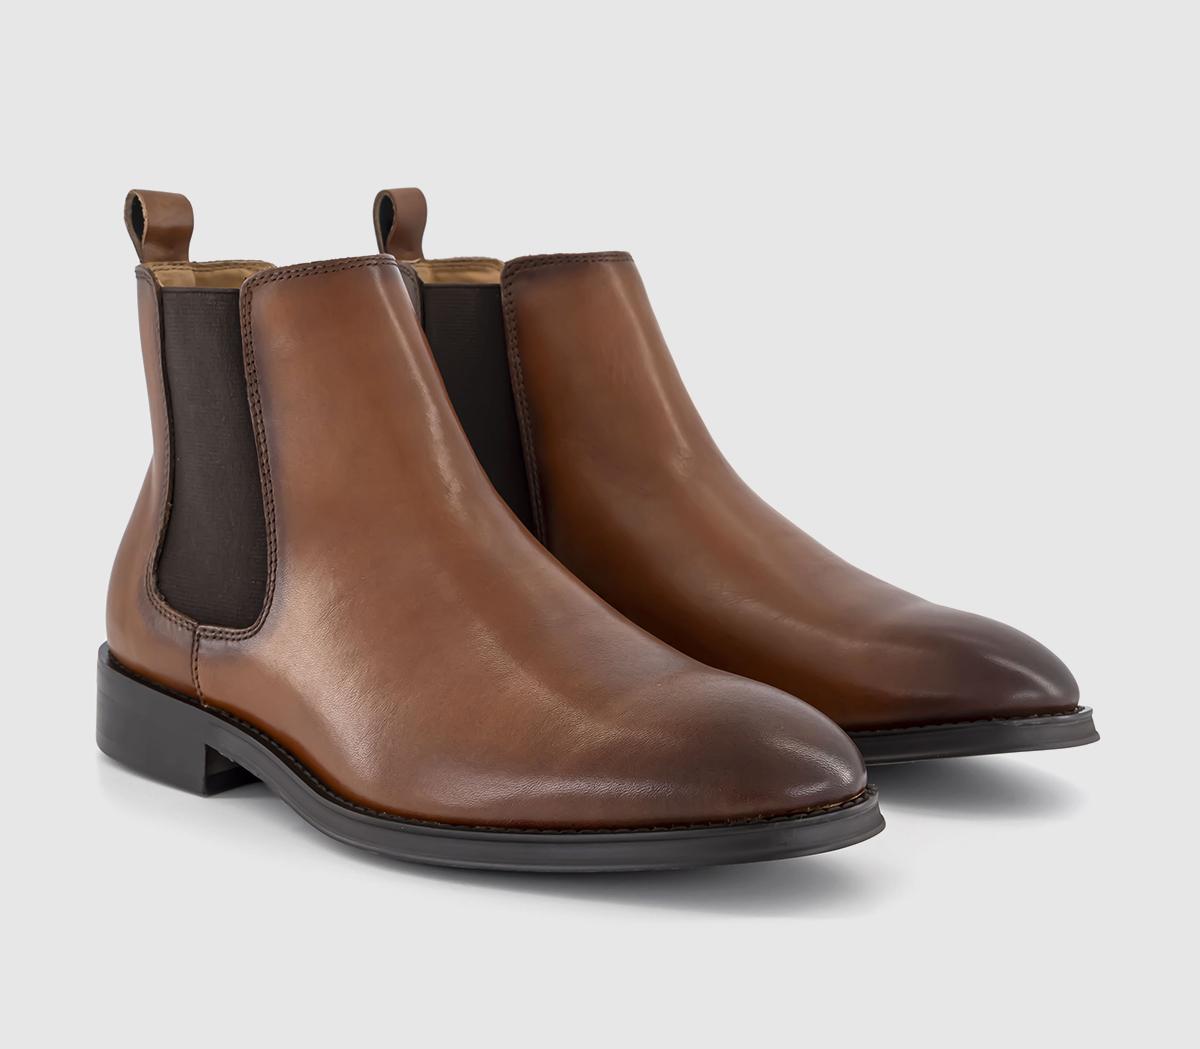 OFFICE Blenheim Chelsea Boots Tan Leather, 10